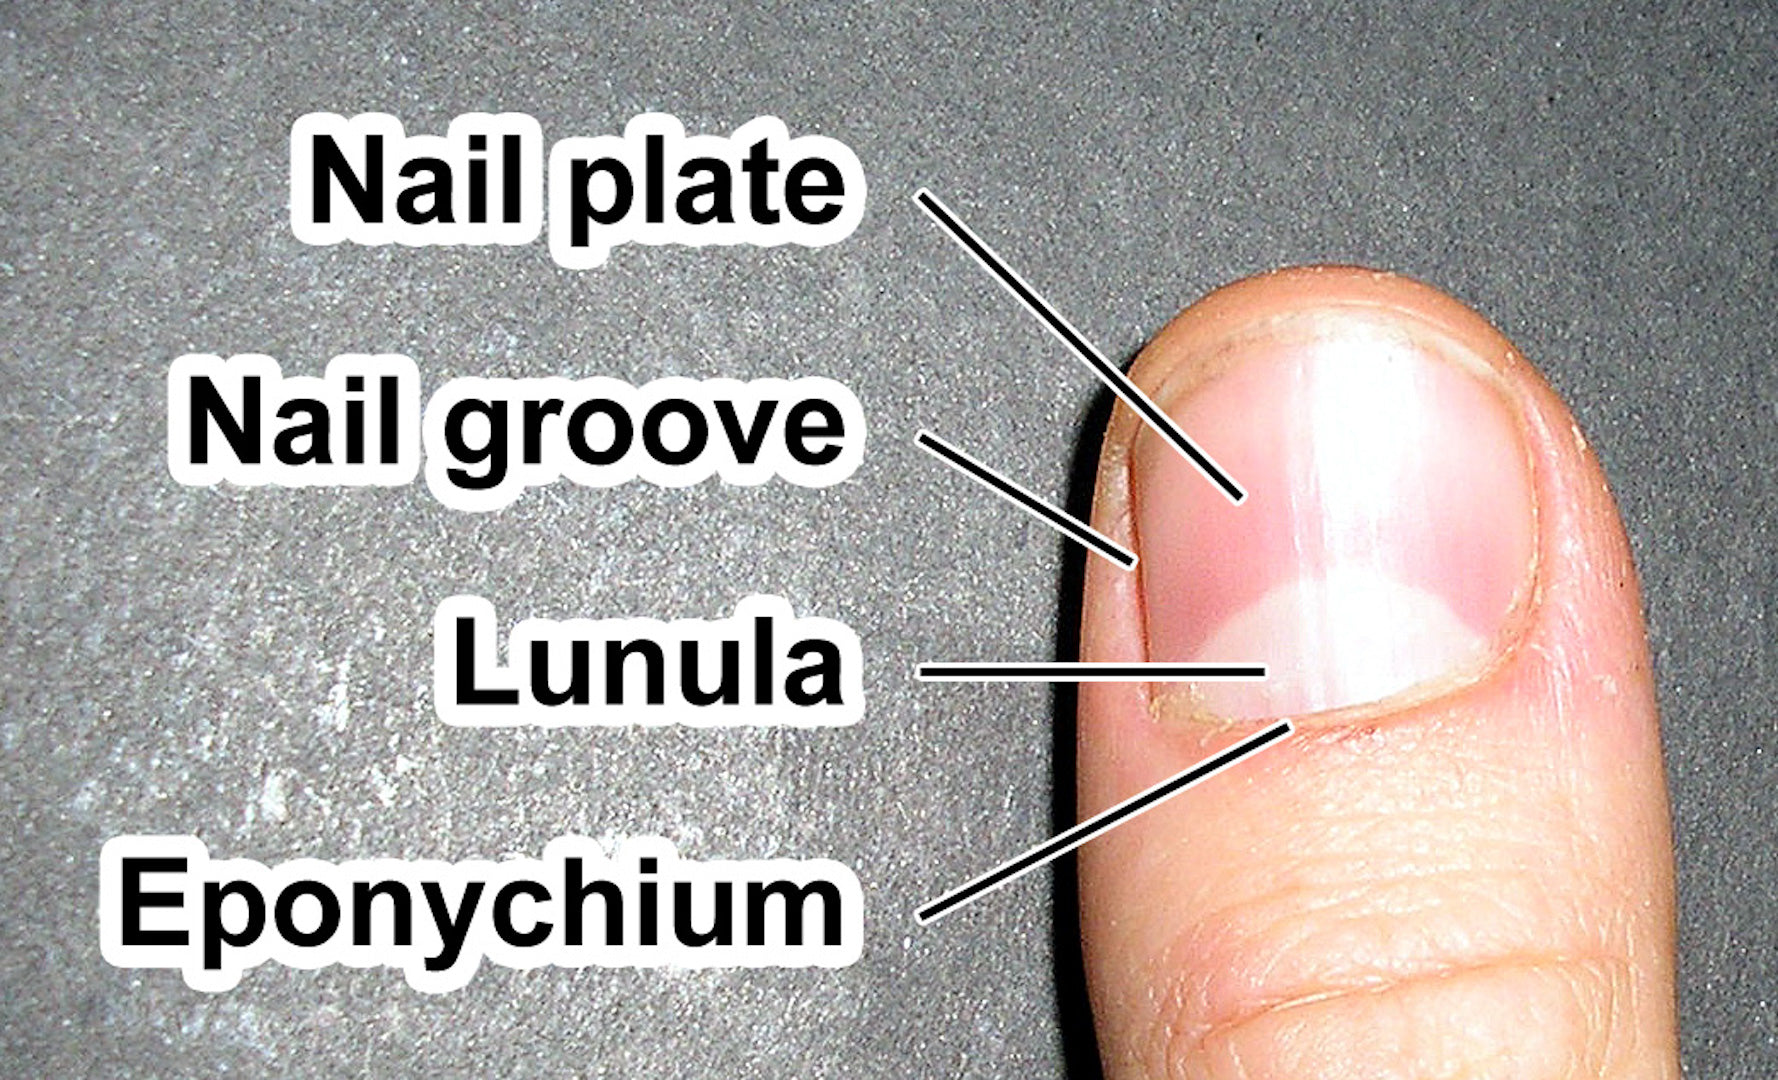 Medical scheme illustration of human finger nail structure | Nail  techniques, Nail tech school, Nail courses